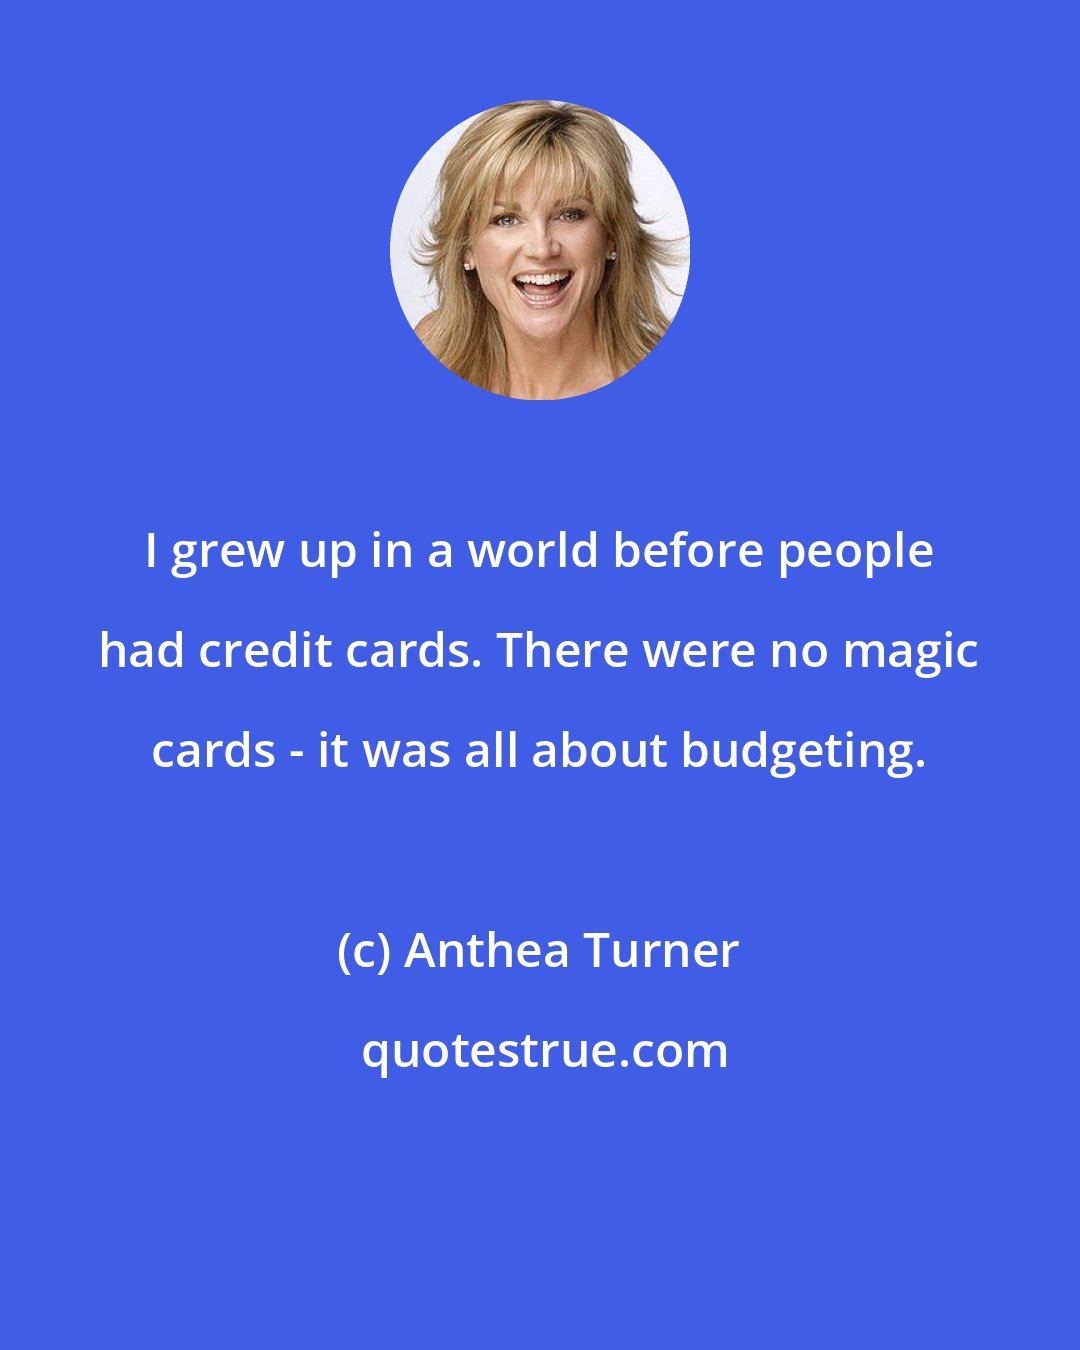 Anthea Turner: I grew up in a world before people had credit cards. There were no magic cards - it was all about budgeting.